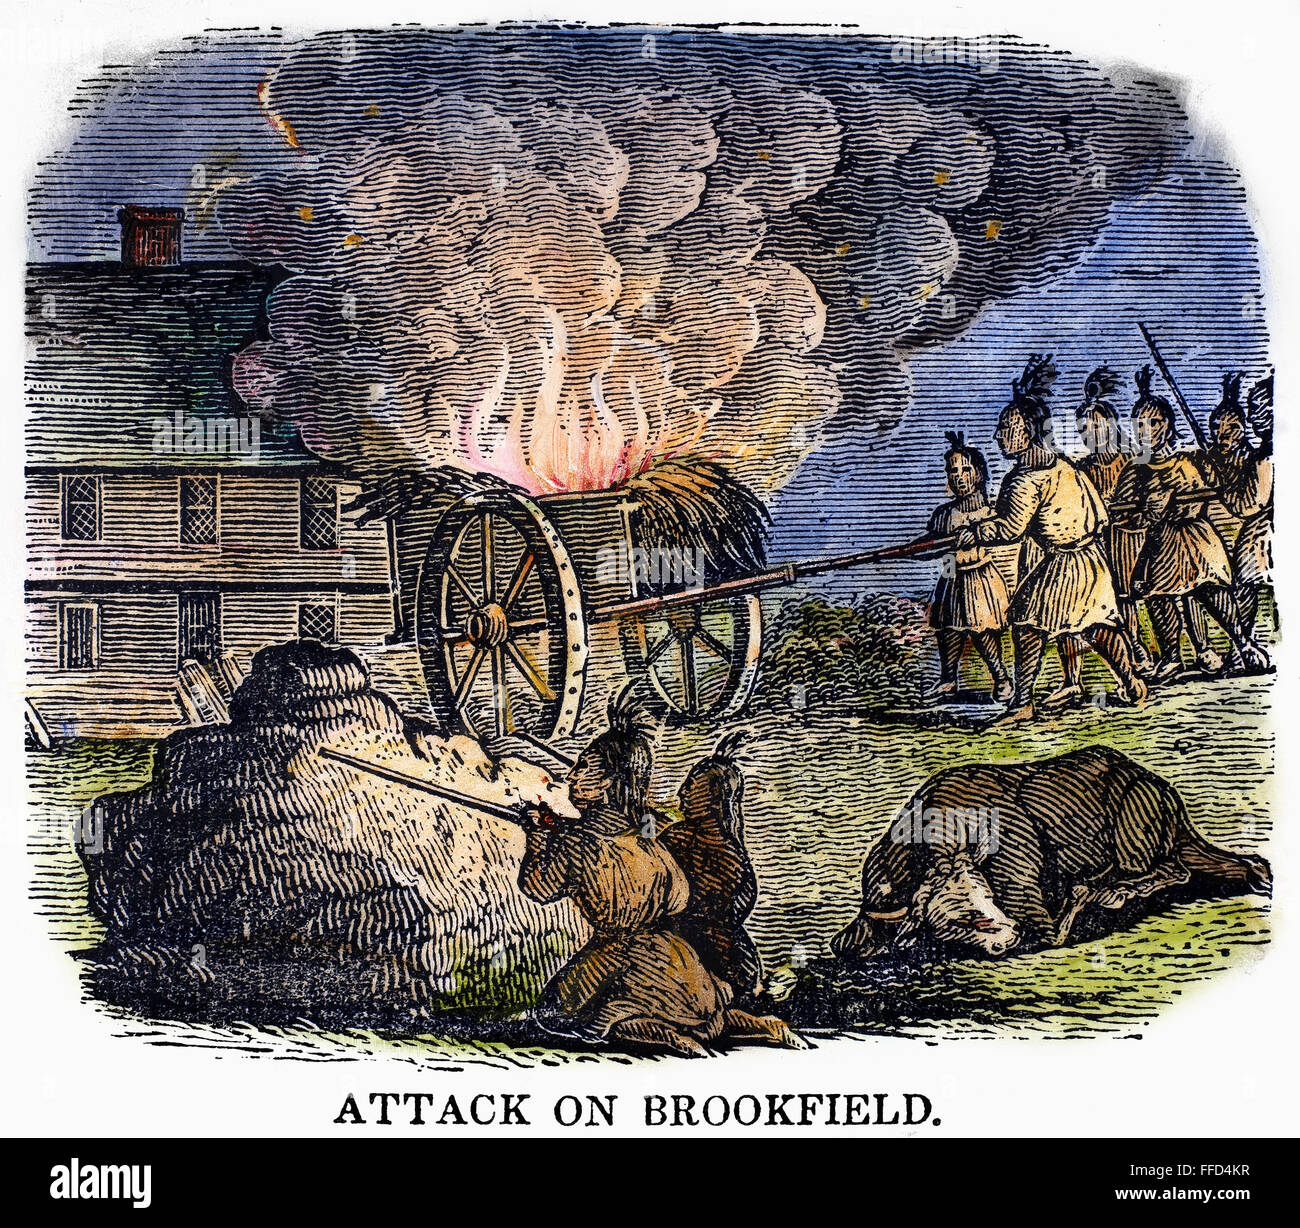 NATIVE AMERICAN ATTACK, 1675. /nNative Americans attacking a Massachusetts village (Brookfield or Deerfield) during King Philip's War, 1675. Wood engraving, American, c1829. Stock Photo